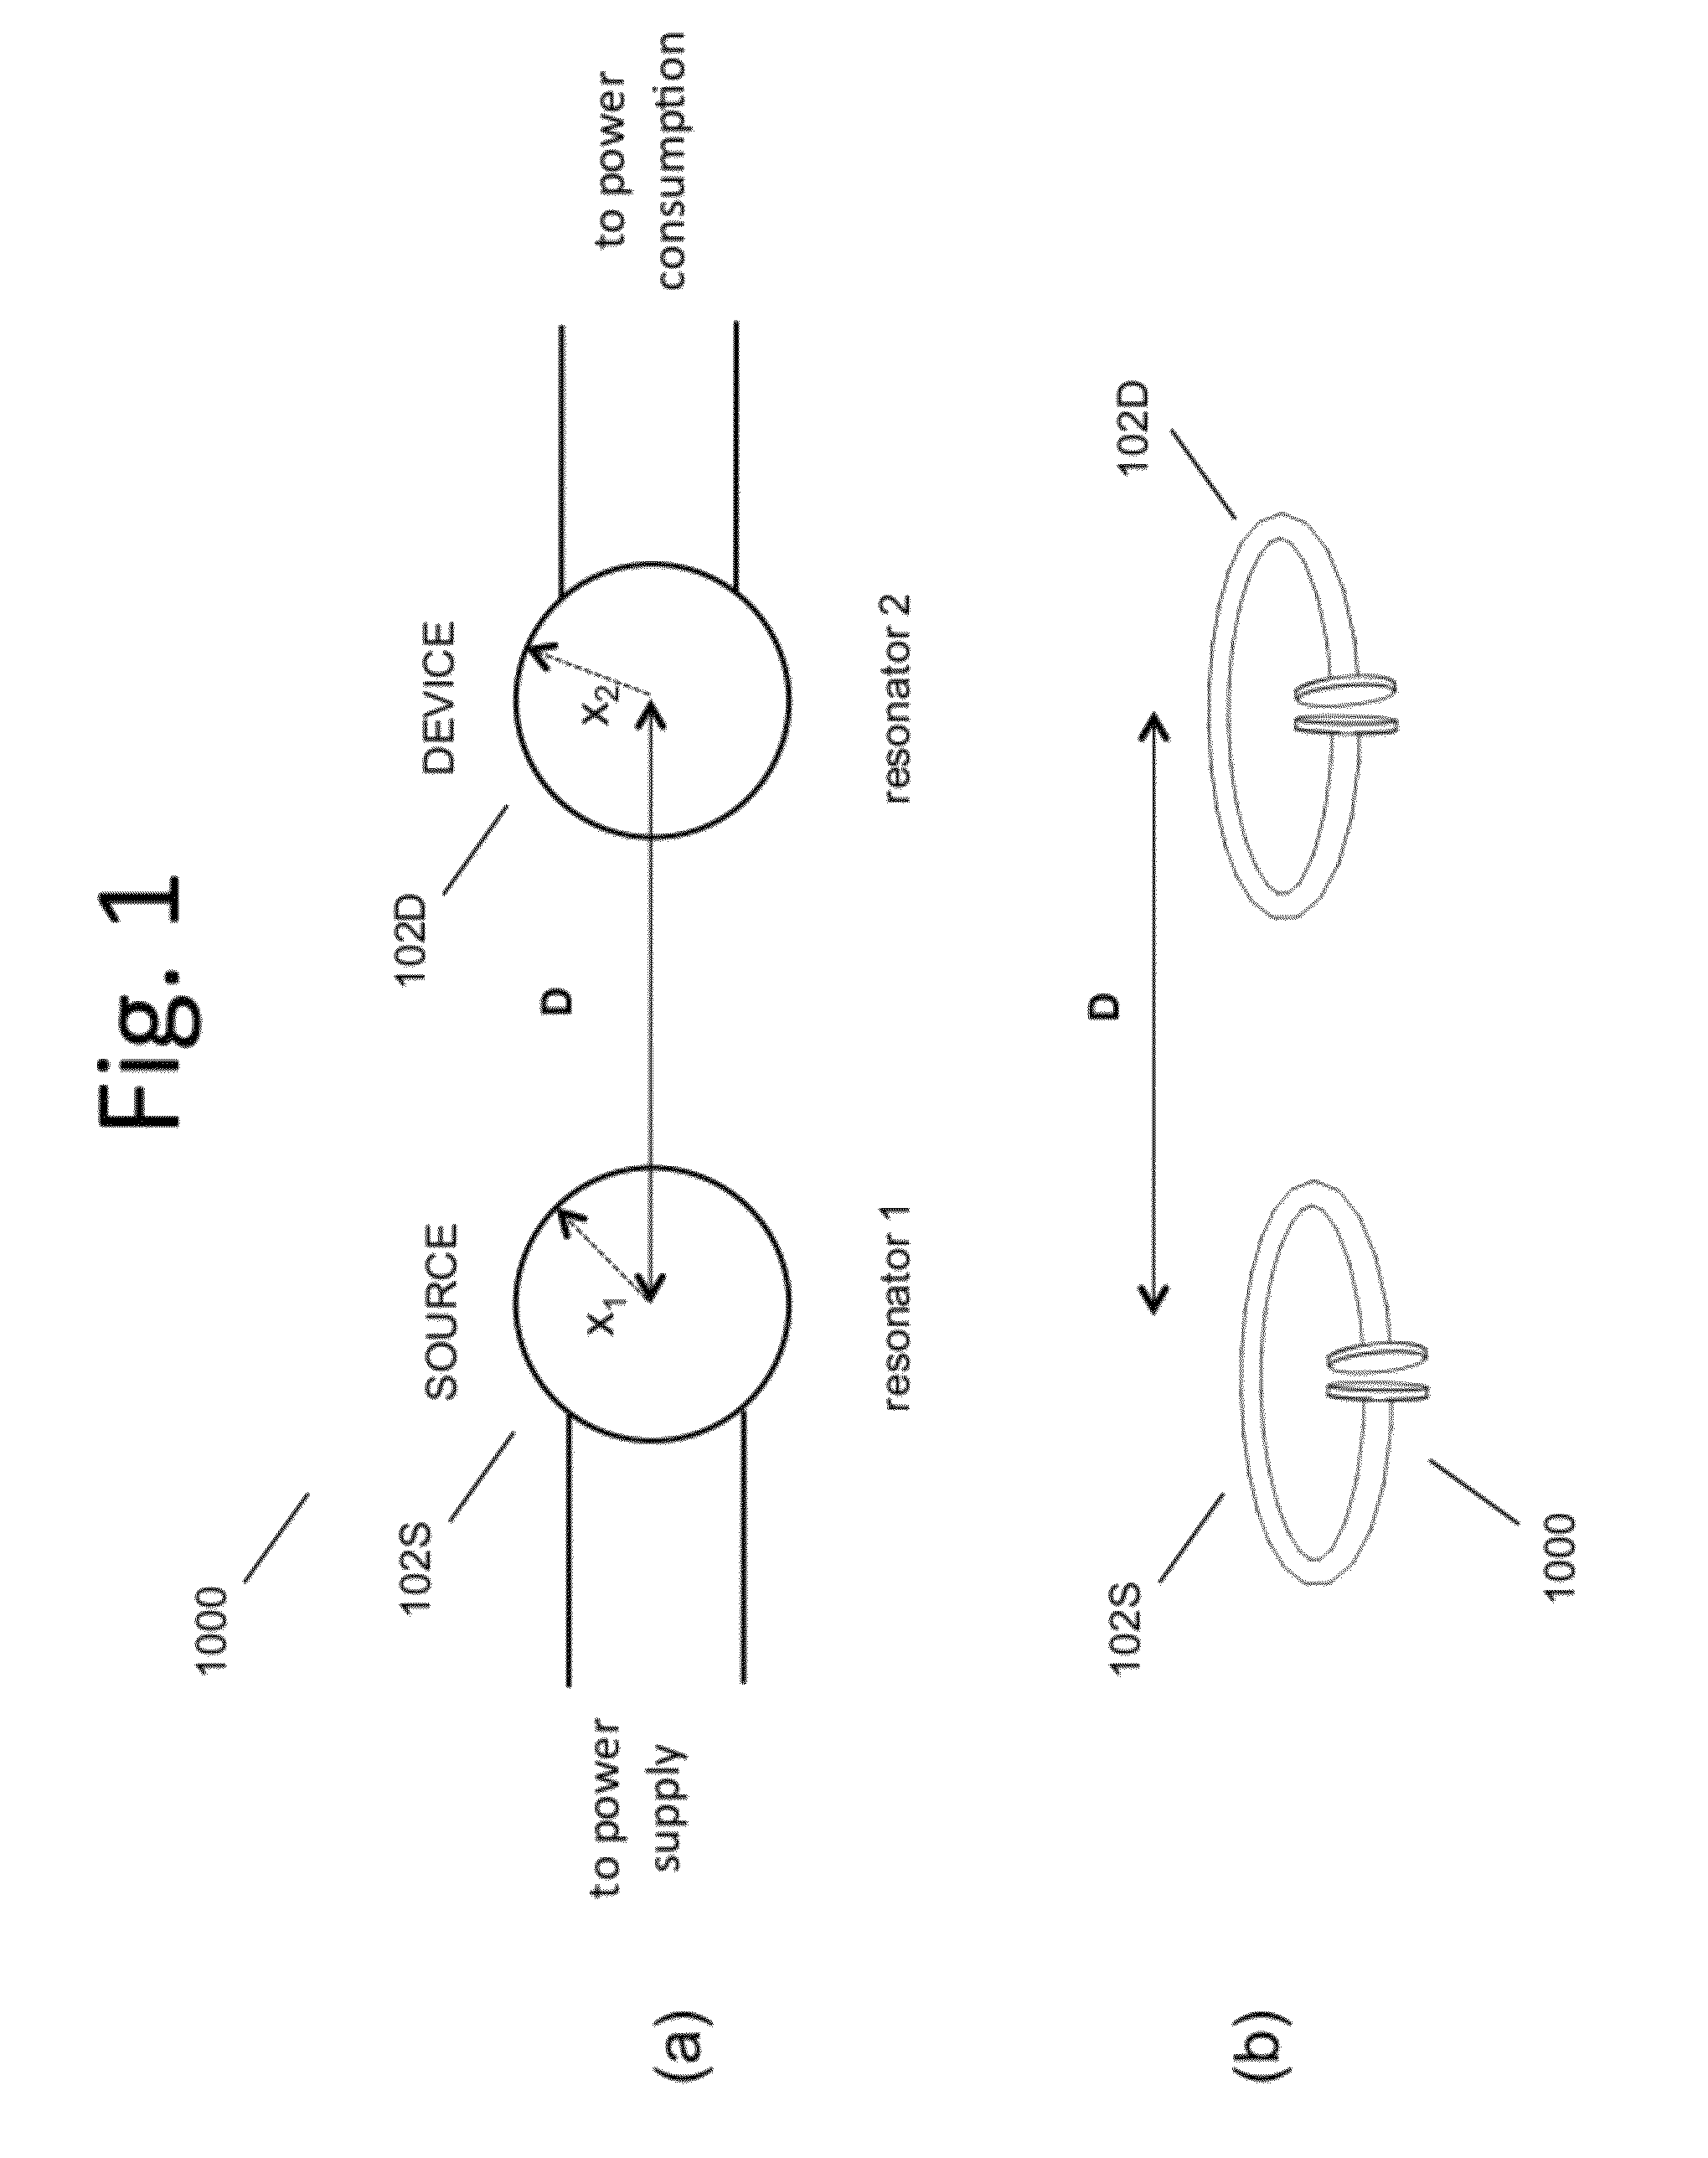 Wireless energy transfer using object positioning for improved k